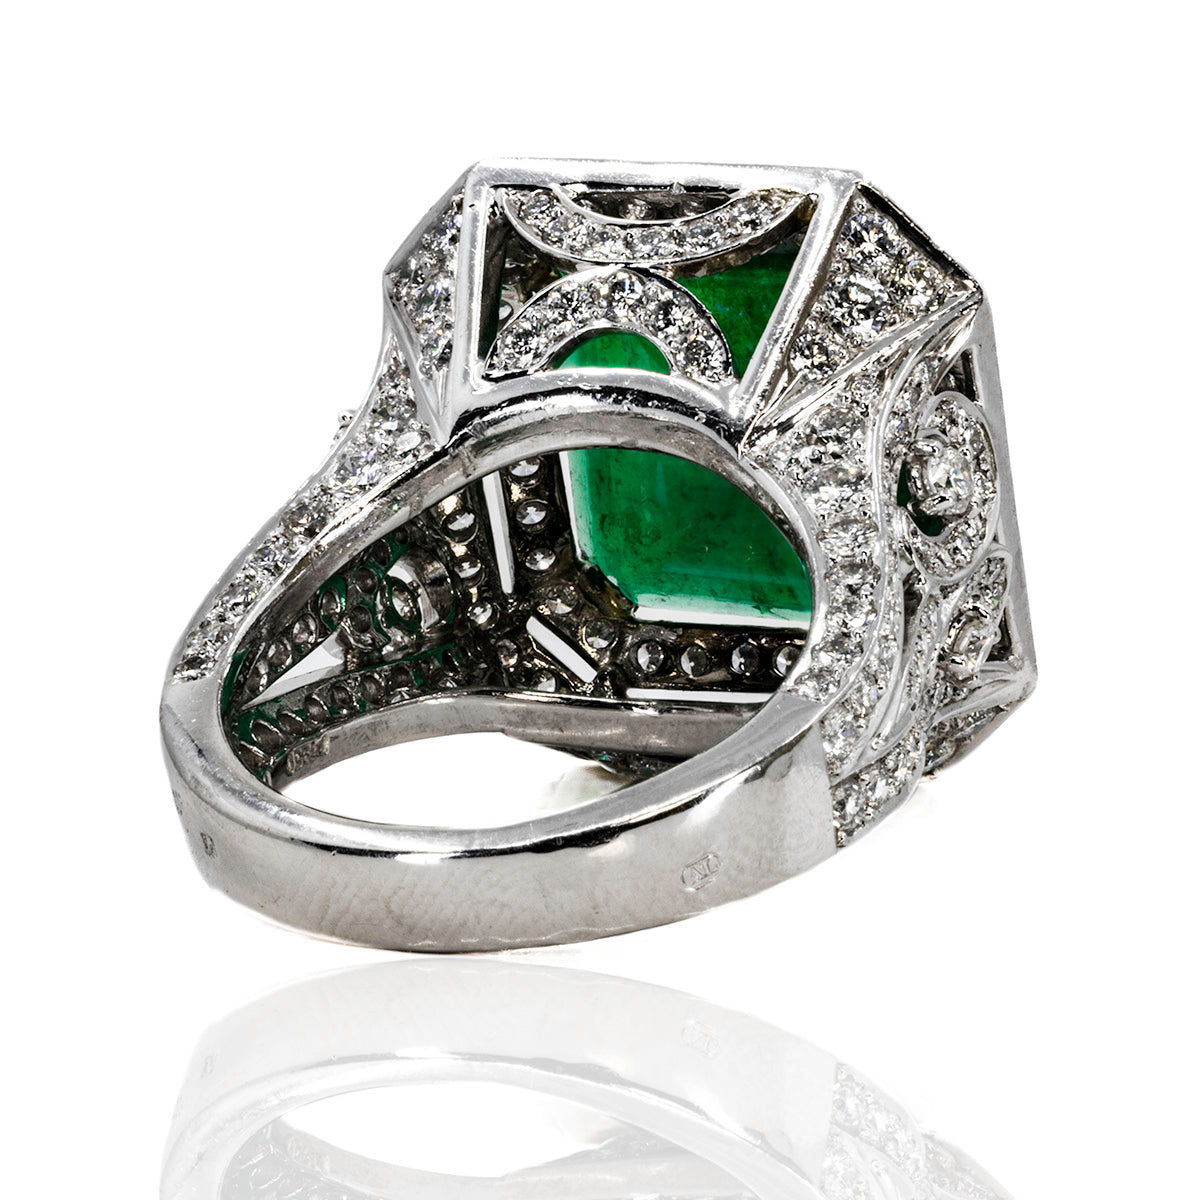 6.81 Carat Colombian Emerald Ring